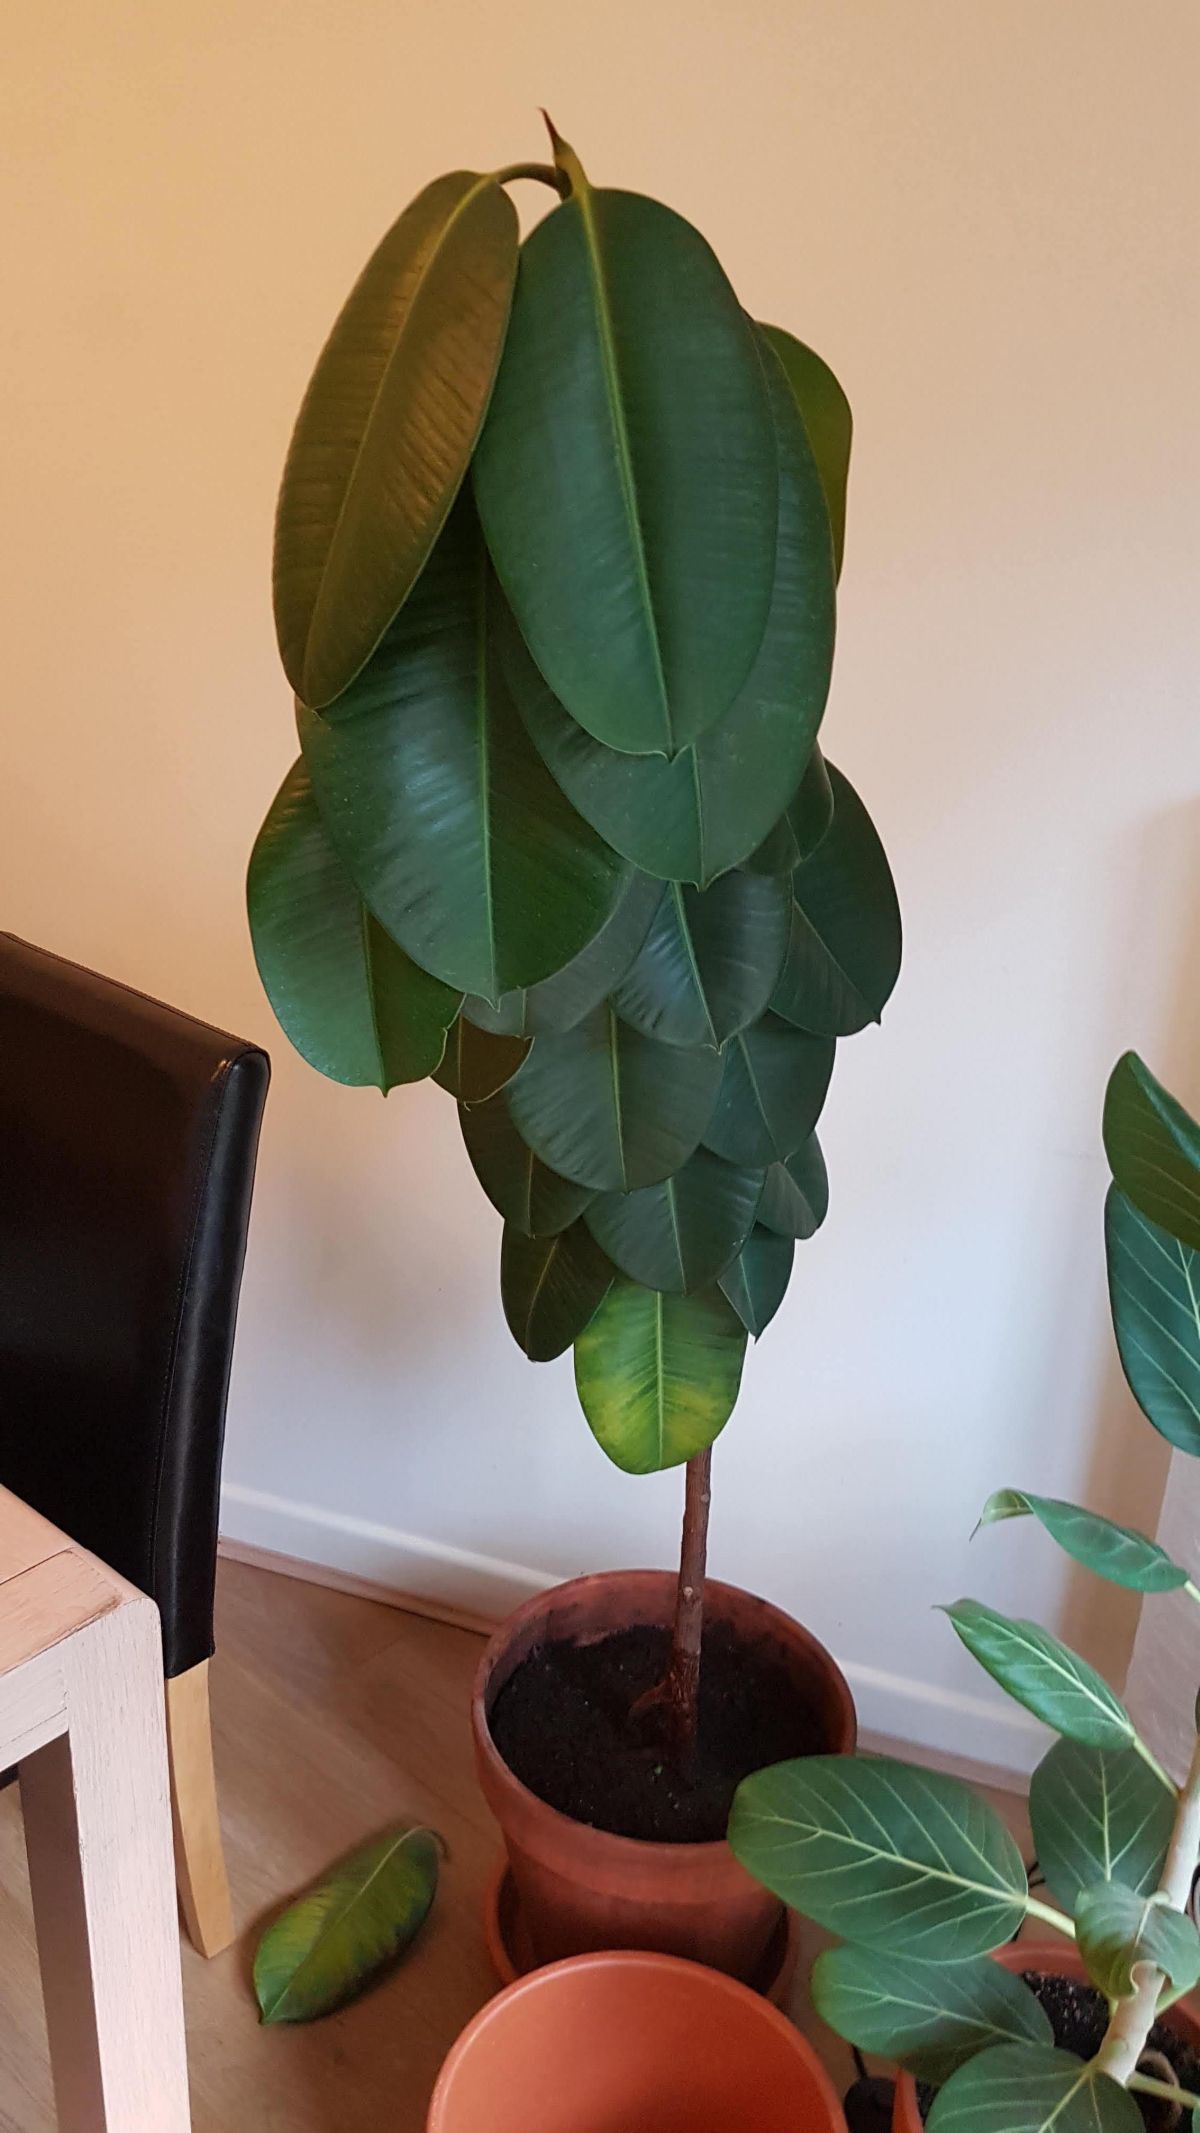 Rubber Plant Has Its Leaves Drooping 